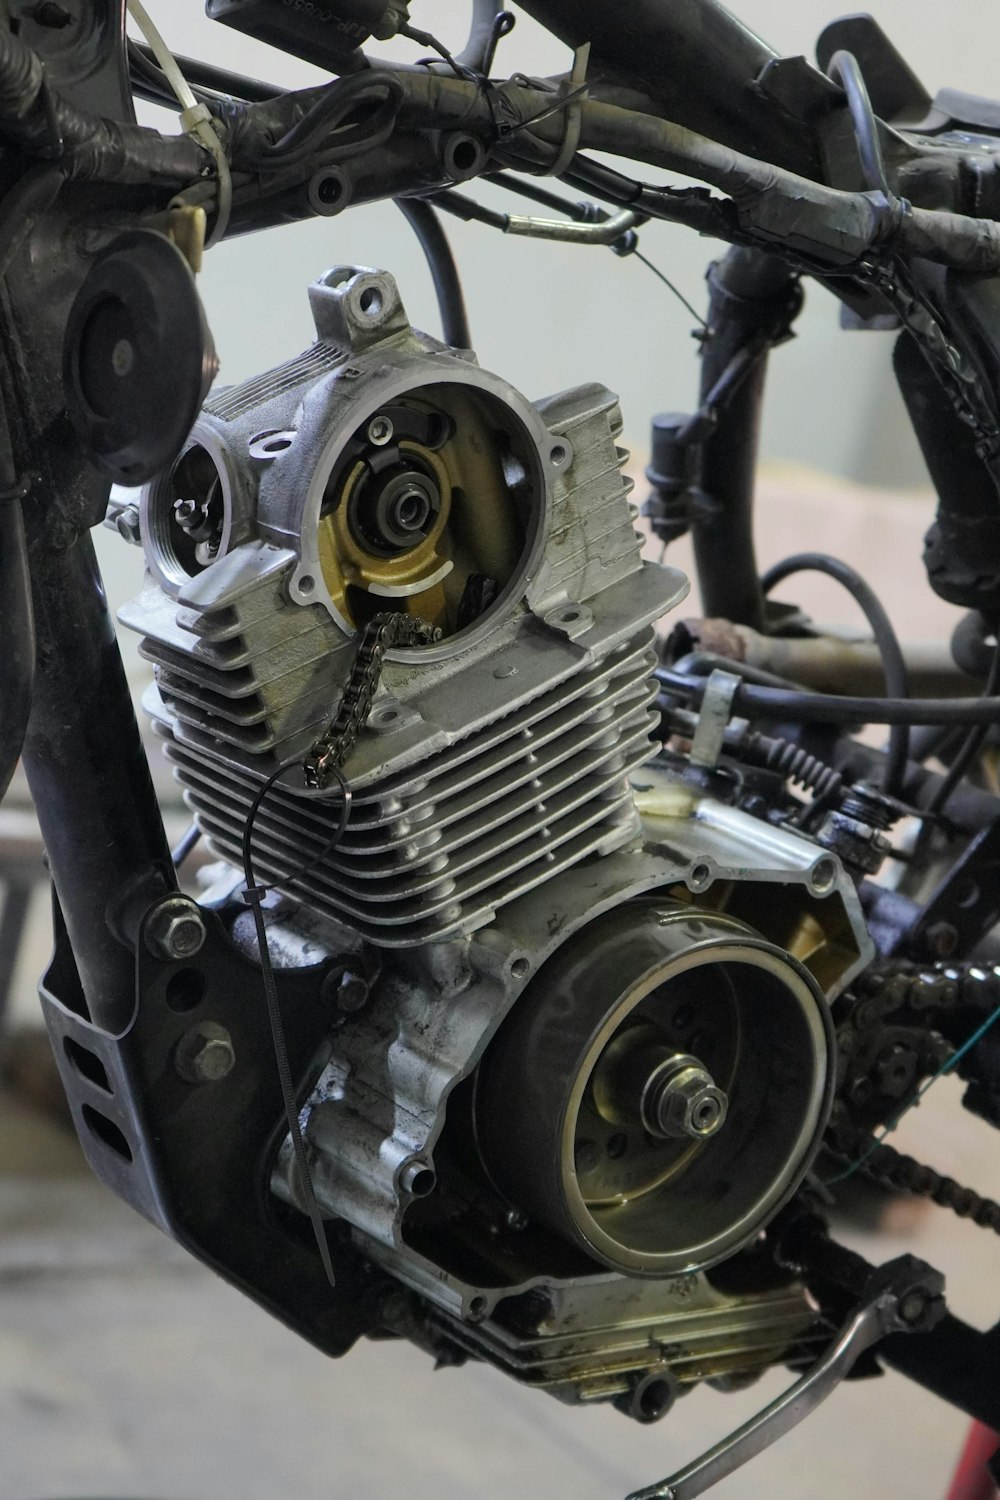 a close up of a motorcycle engine on a bike